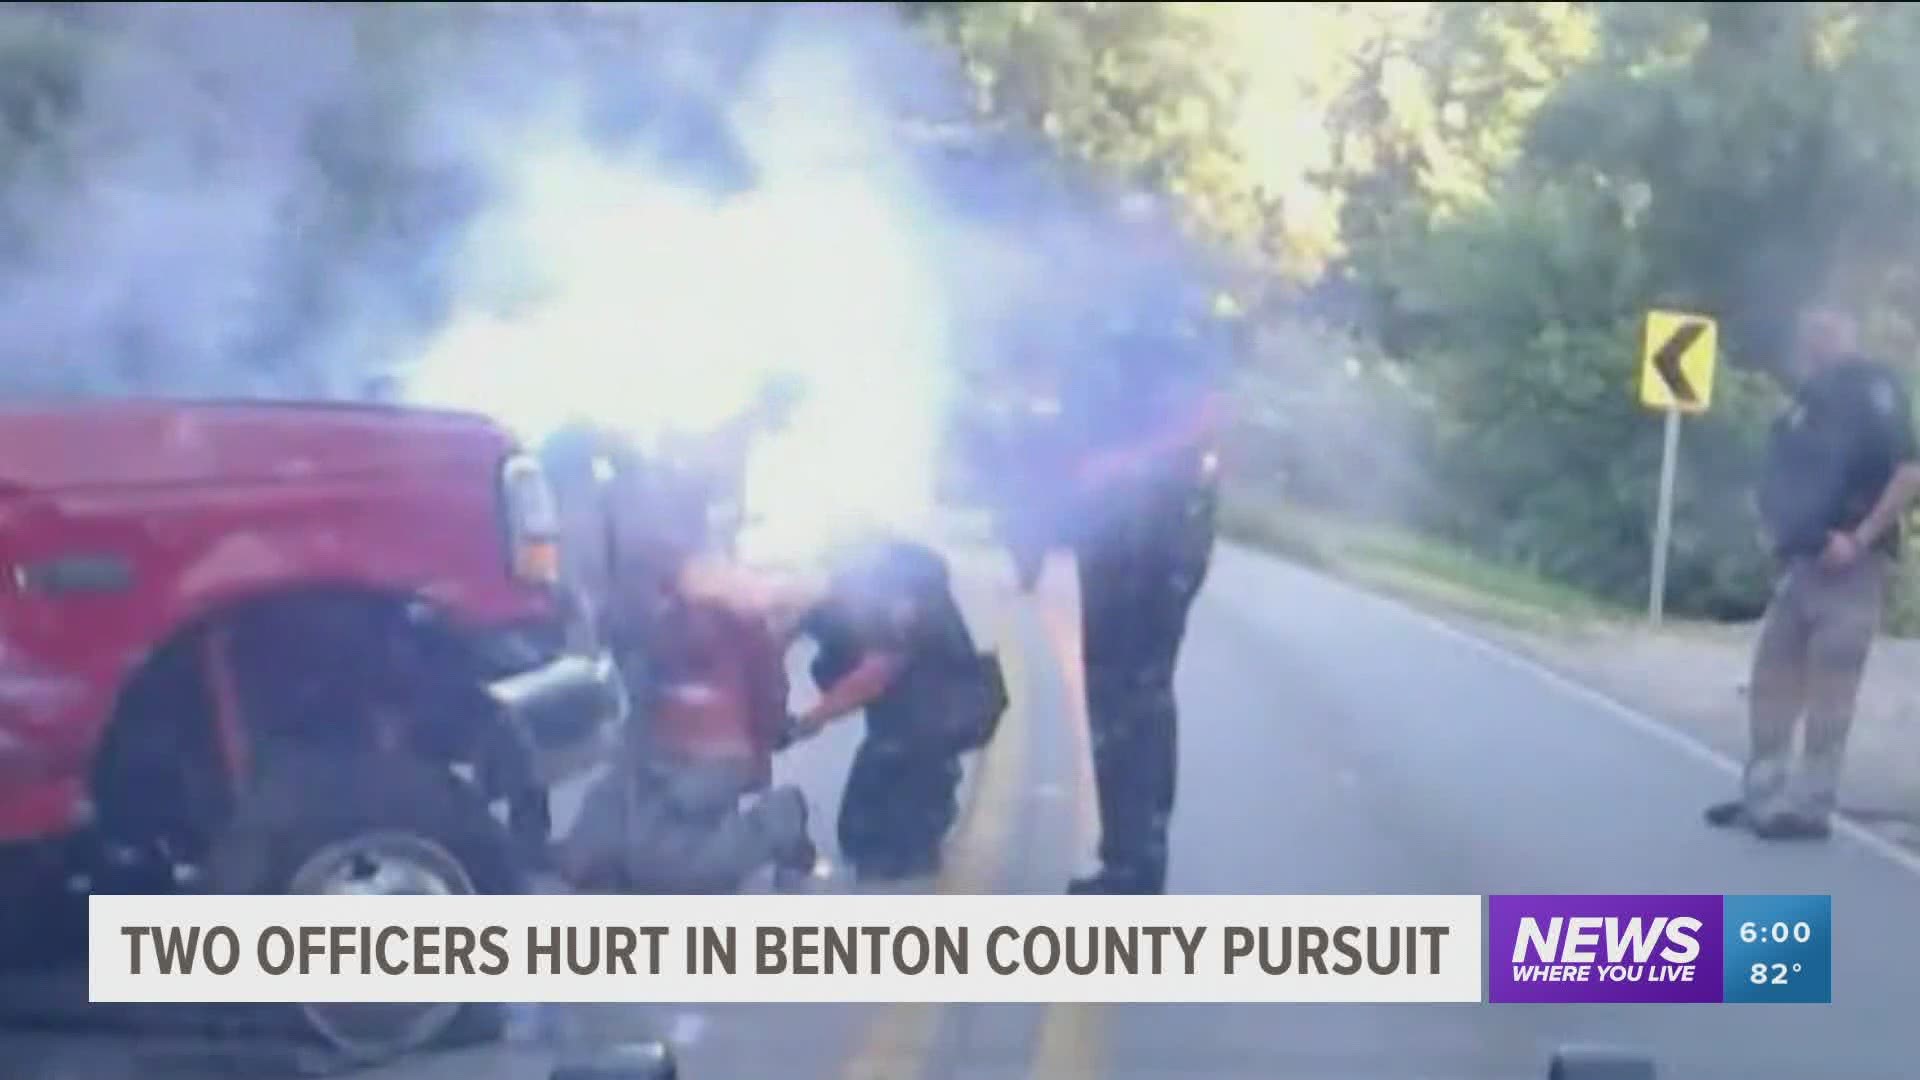 Two officers hurt in Benton County pursuit